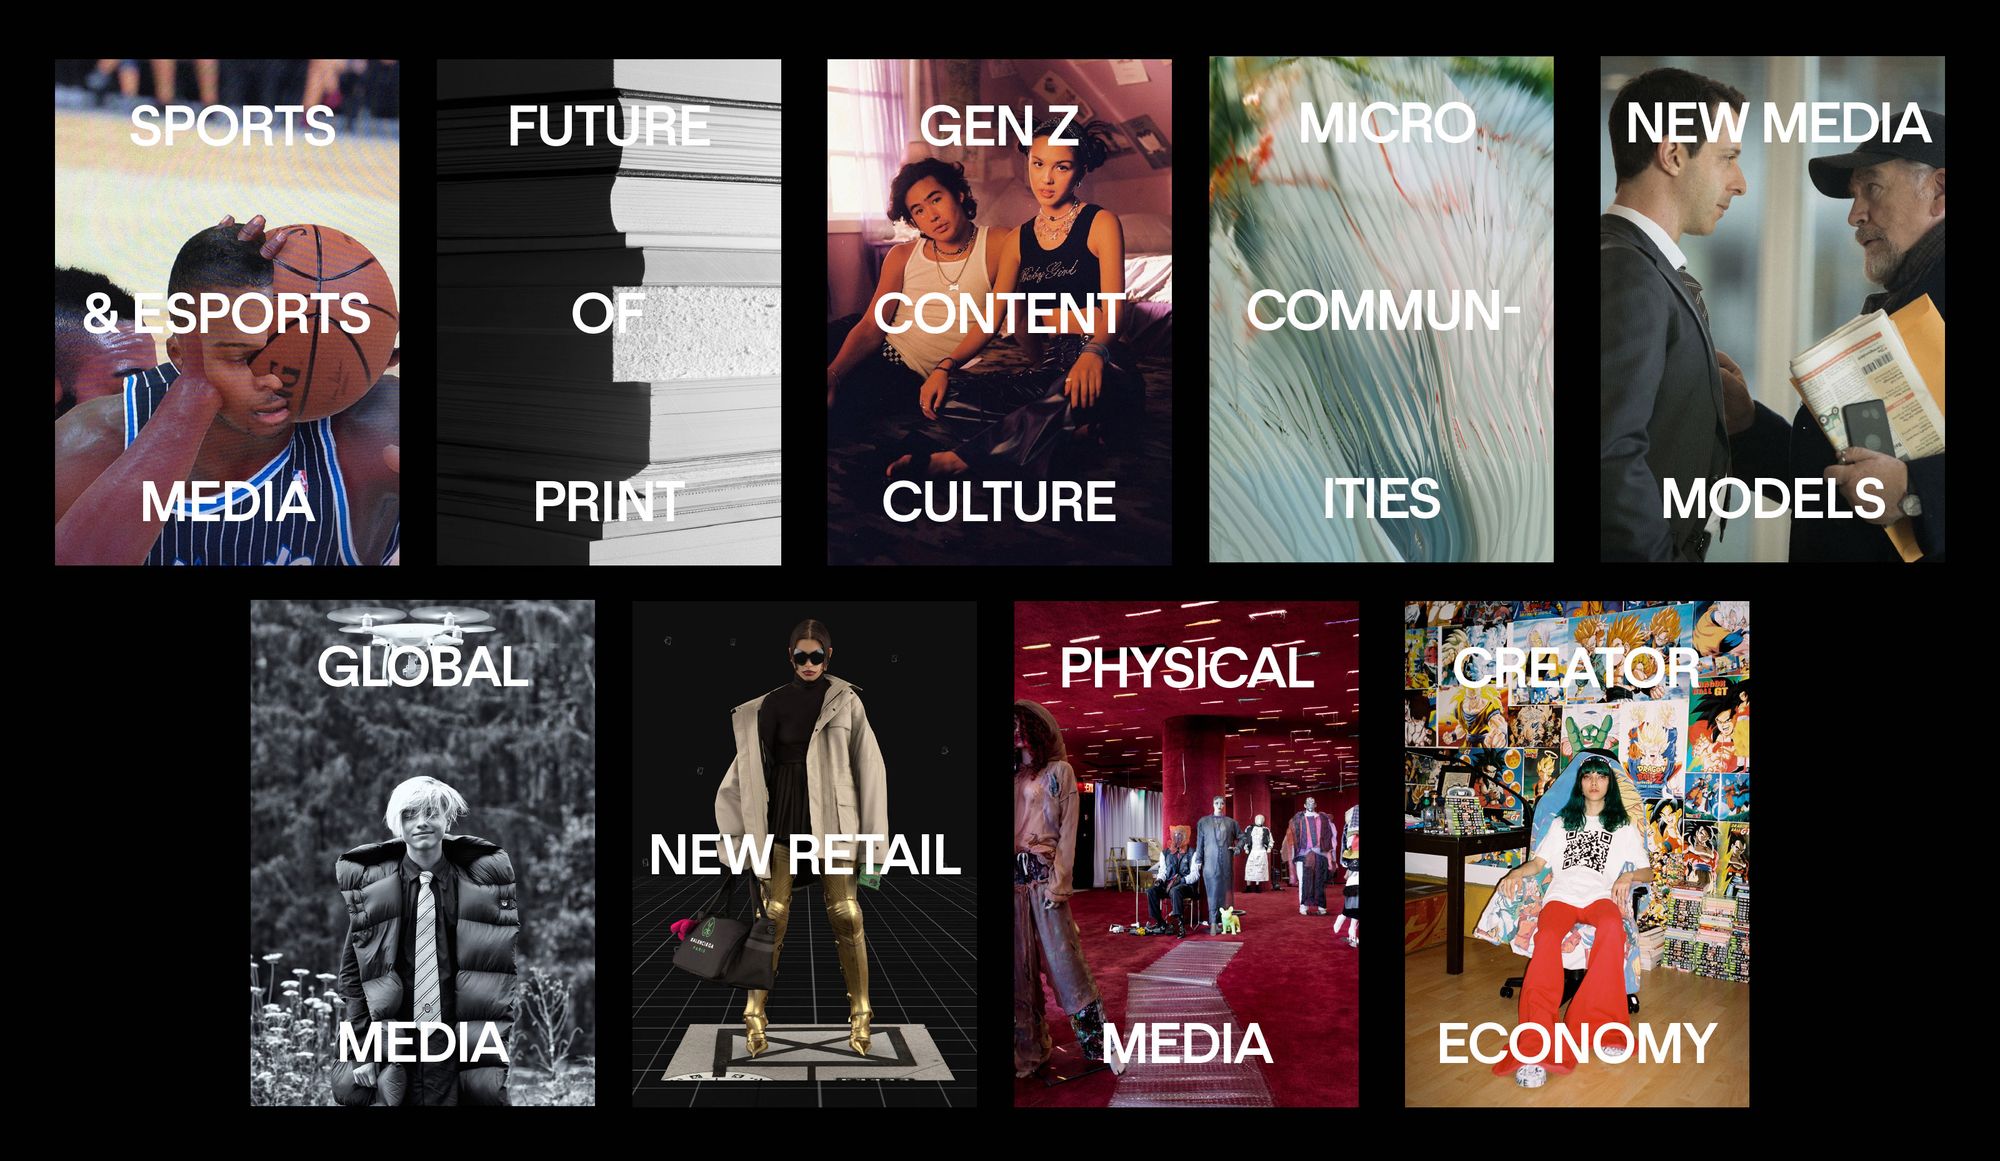 Office of Applied Strategy: Commissioned Research Report for Nike on the Future of Media – List of Chapters